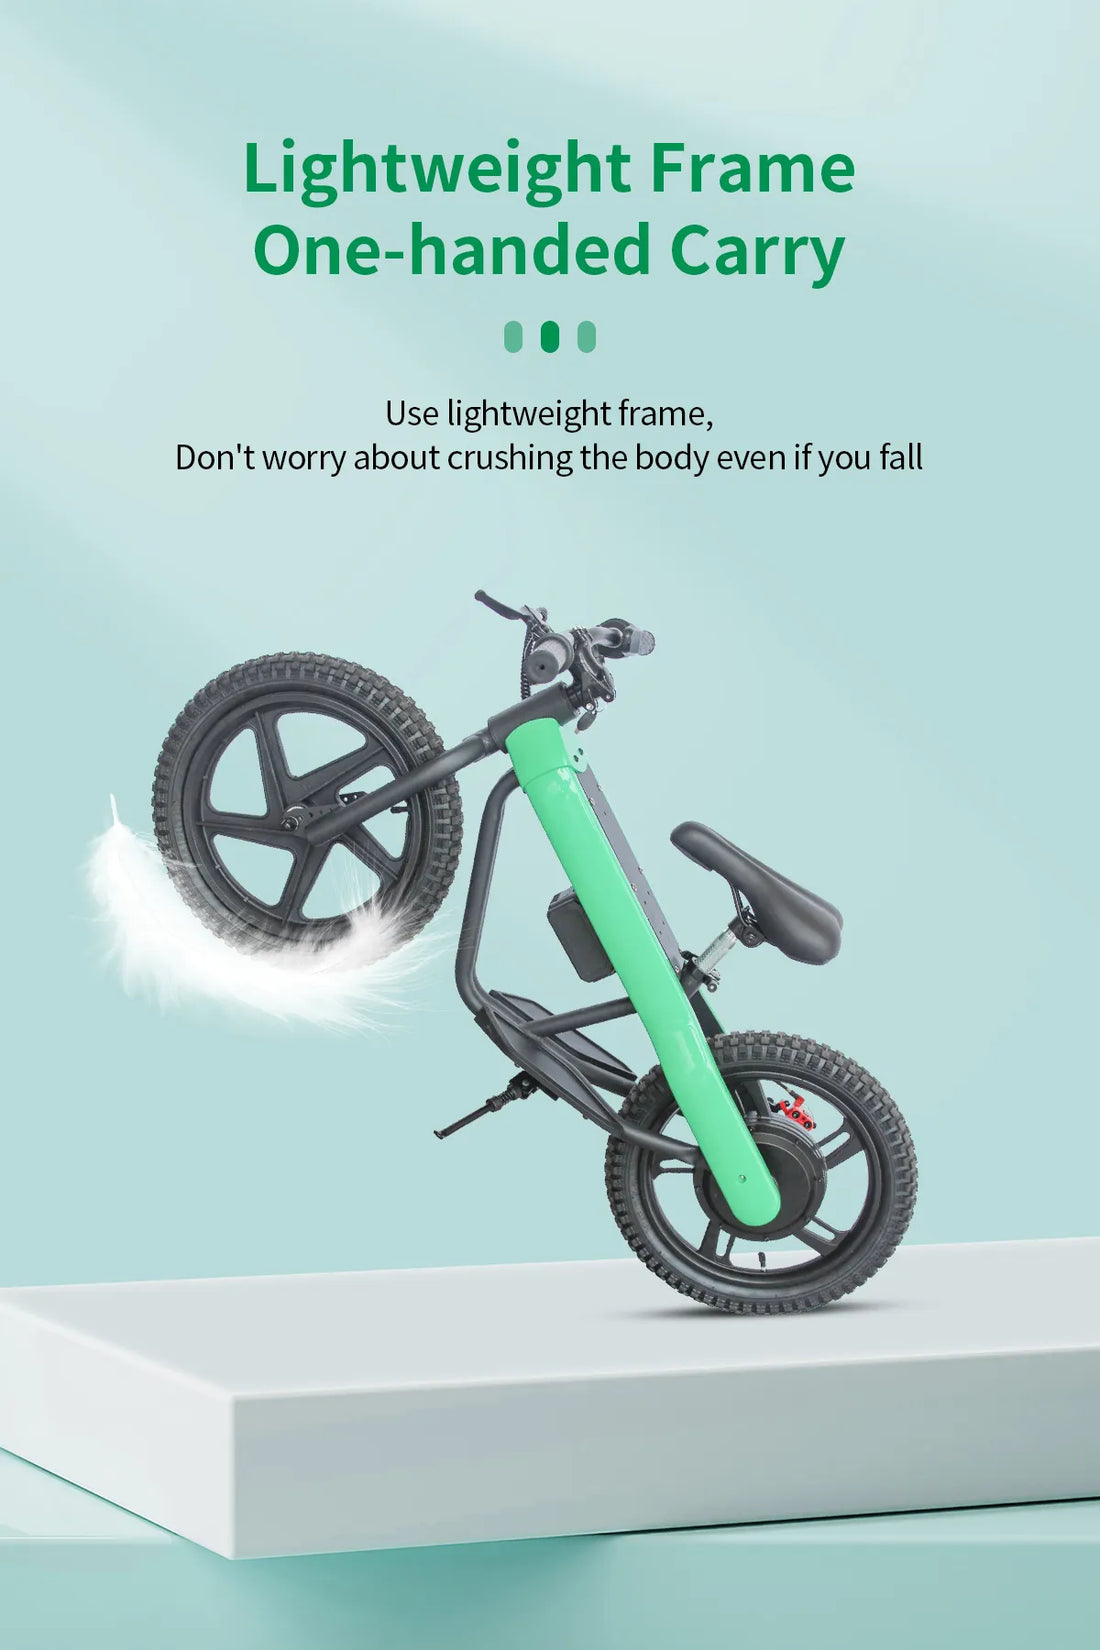 16 Inch Double Seat Electric Balance Bike for Kids